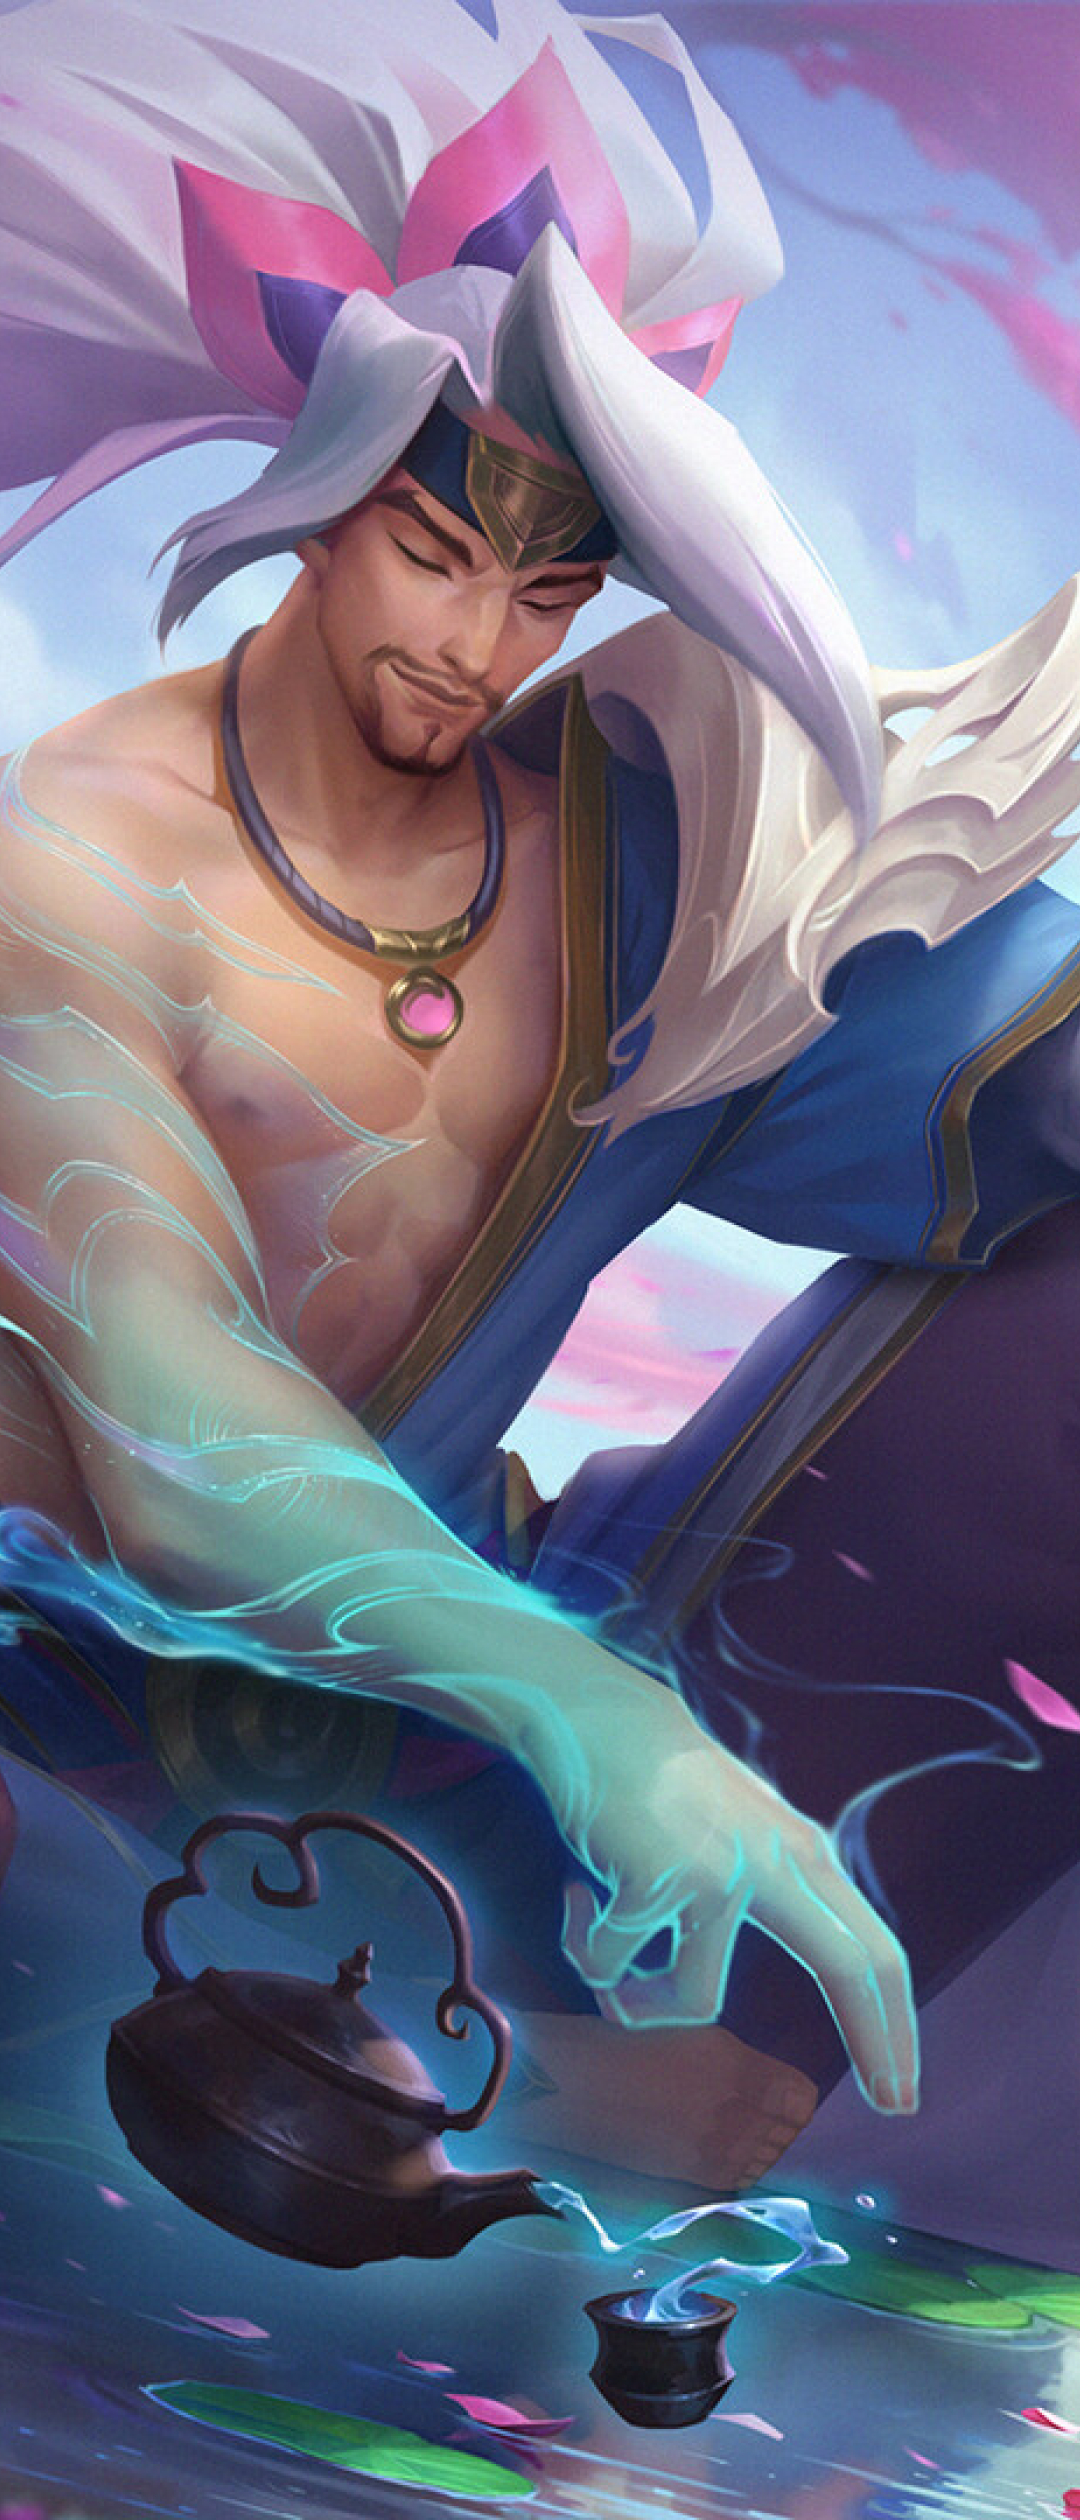 1080x2520 Yasuo and Yone League Of Legends 1080x2520 Resolution